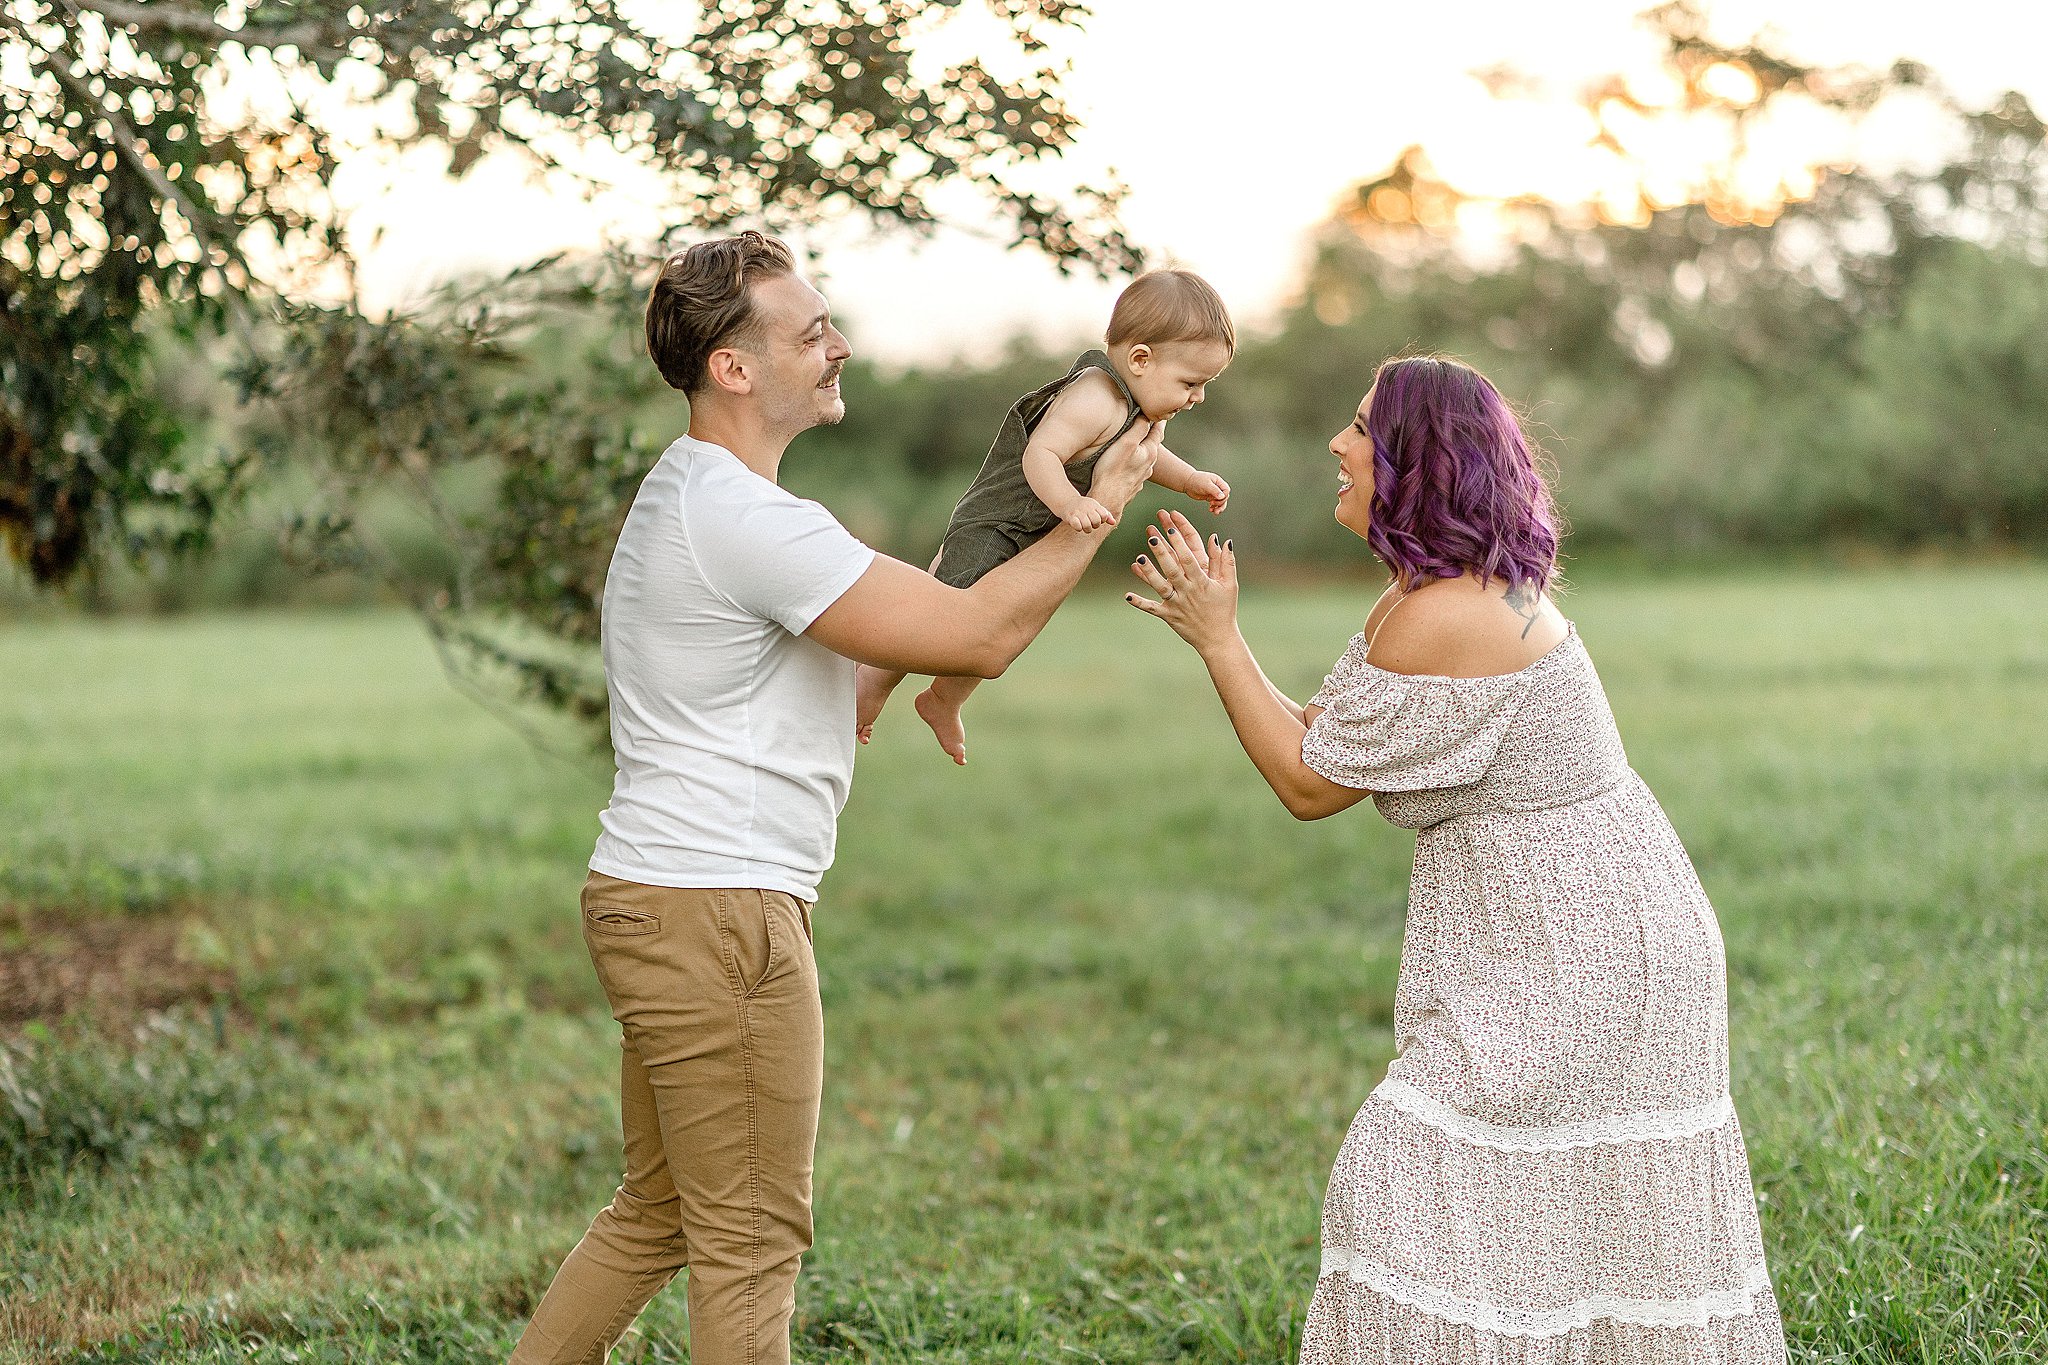 A father lifts his toddler son above mom as they stand and play in a field at sunset